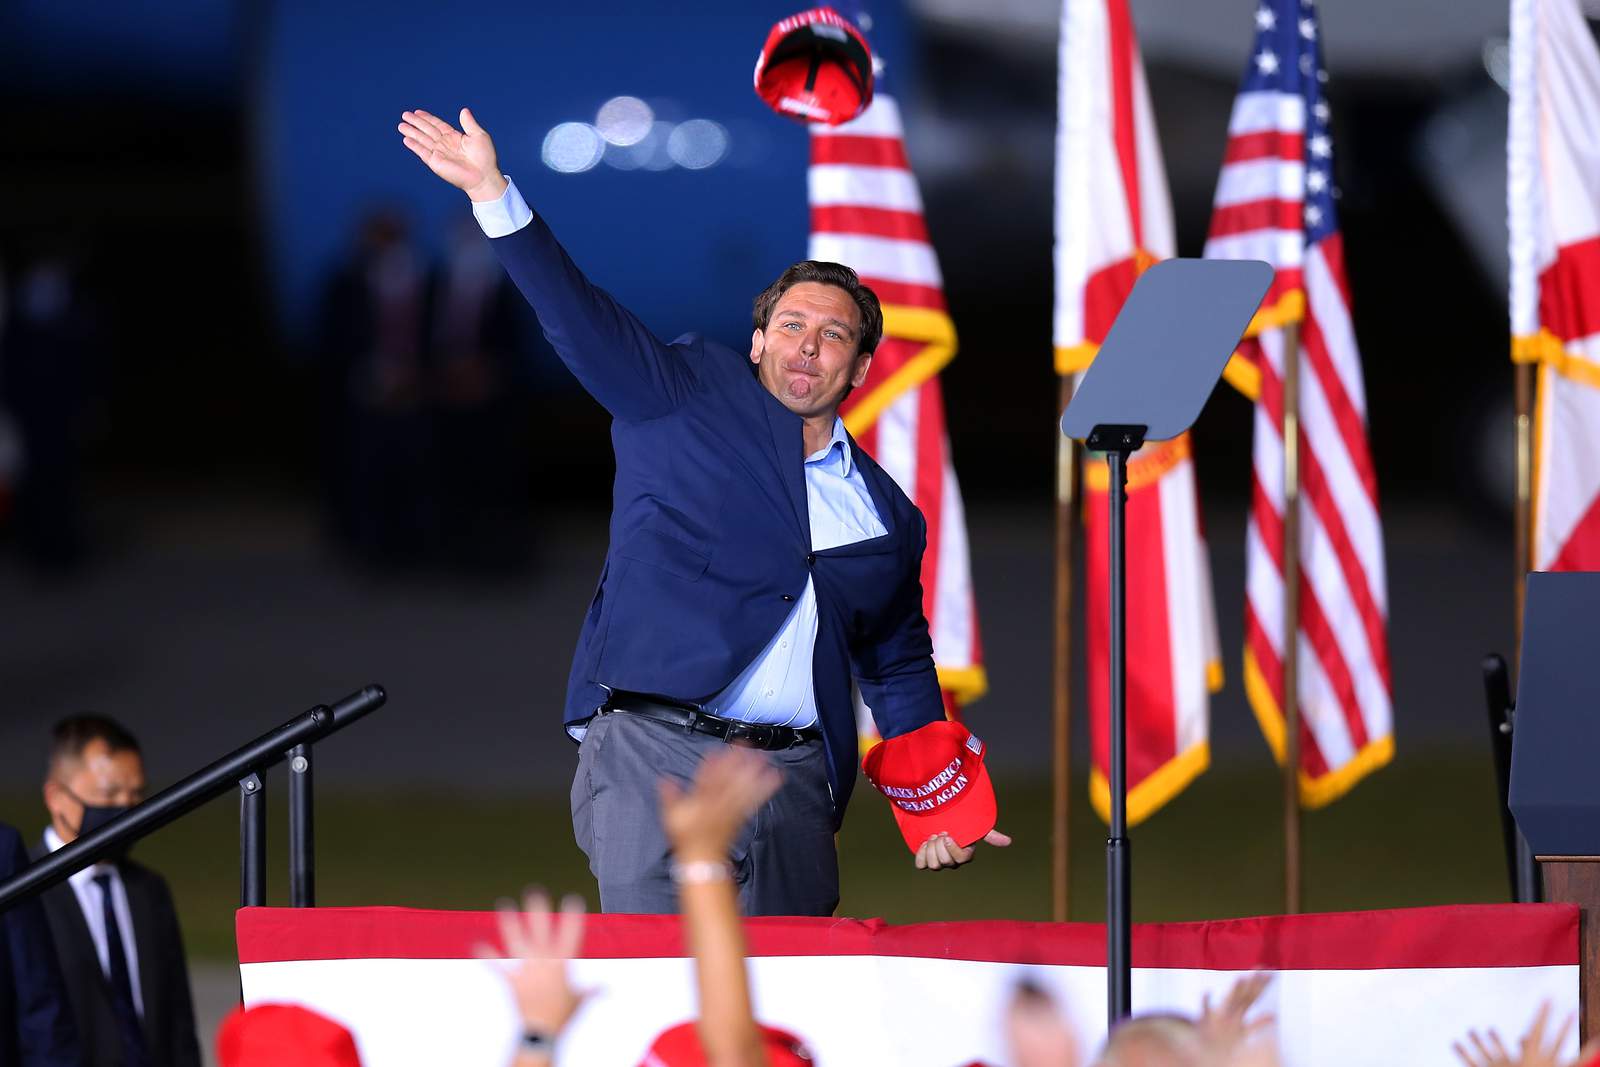 Gov DeSantis: Other states should learn from Florida’s success in 2020 election